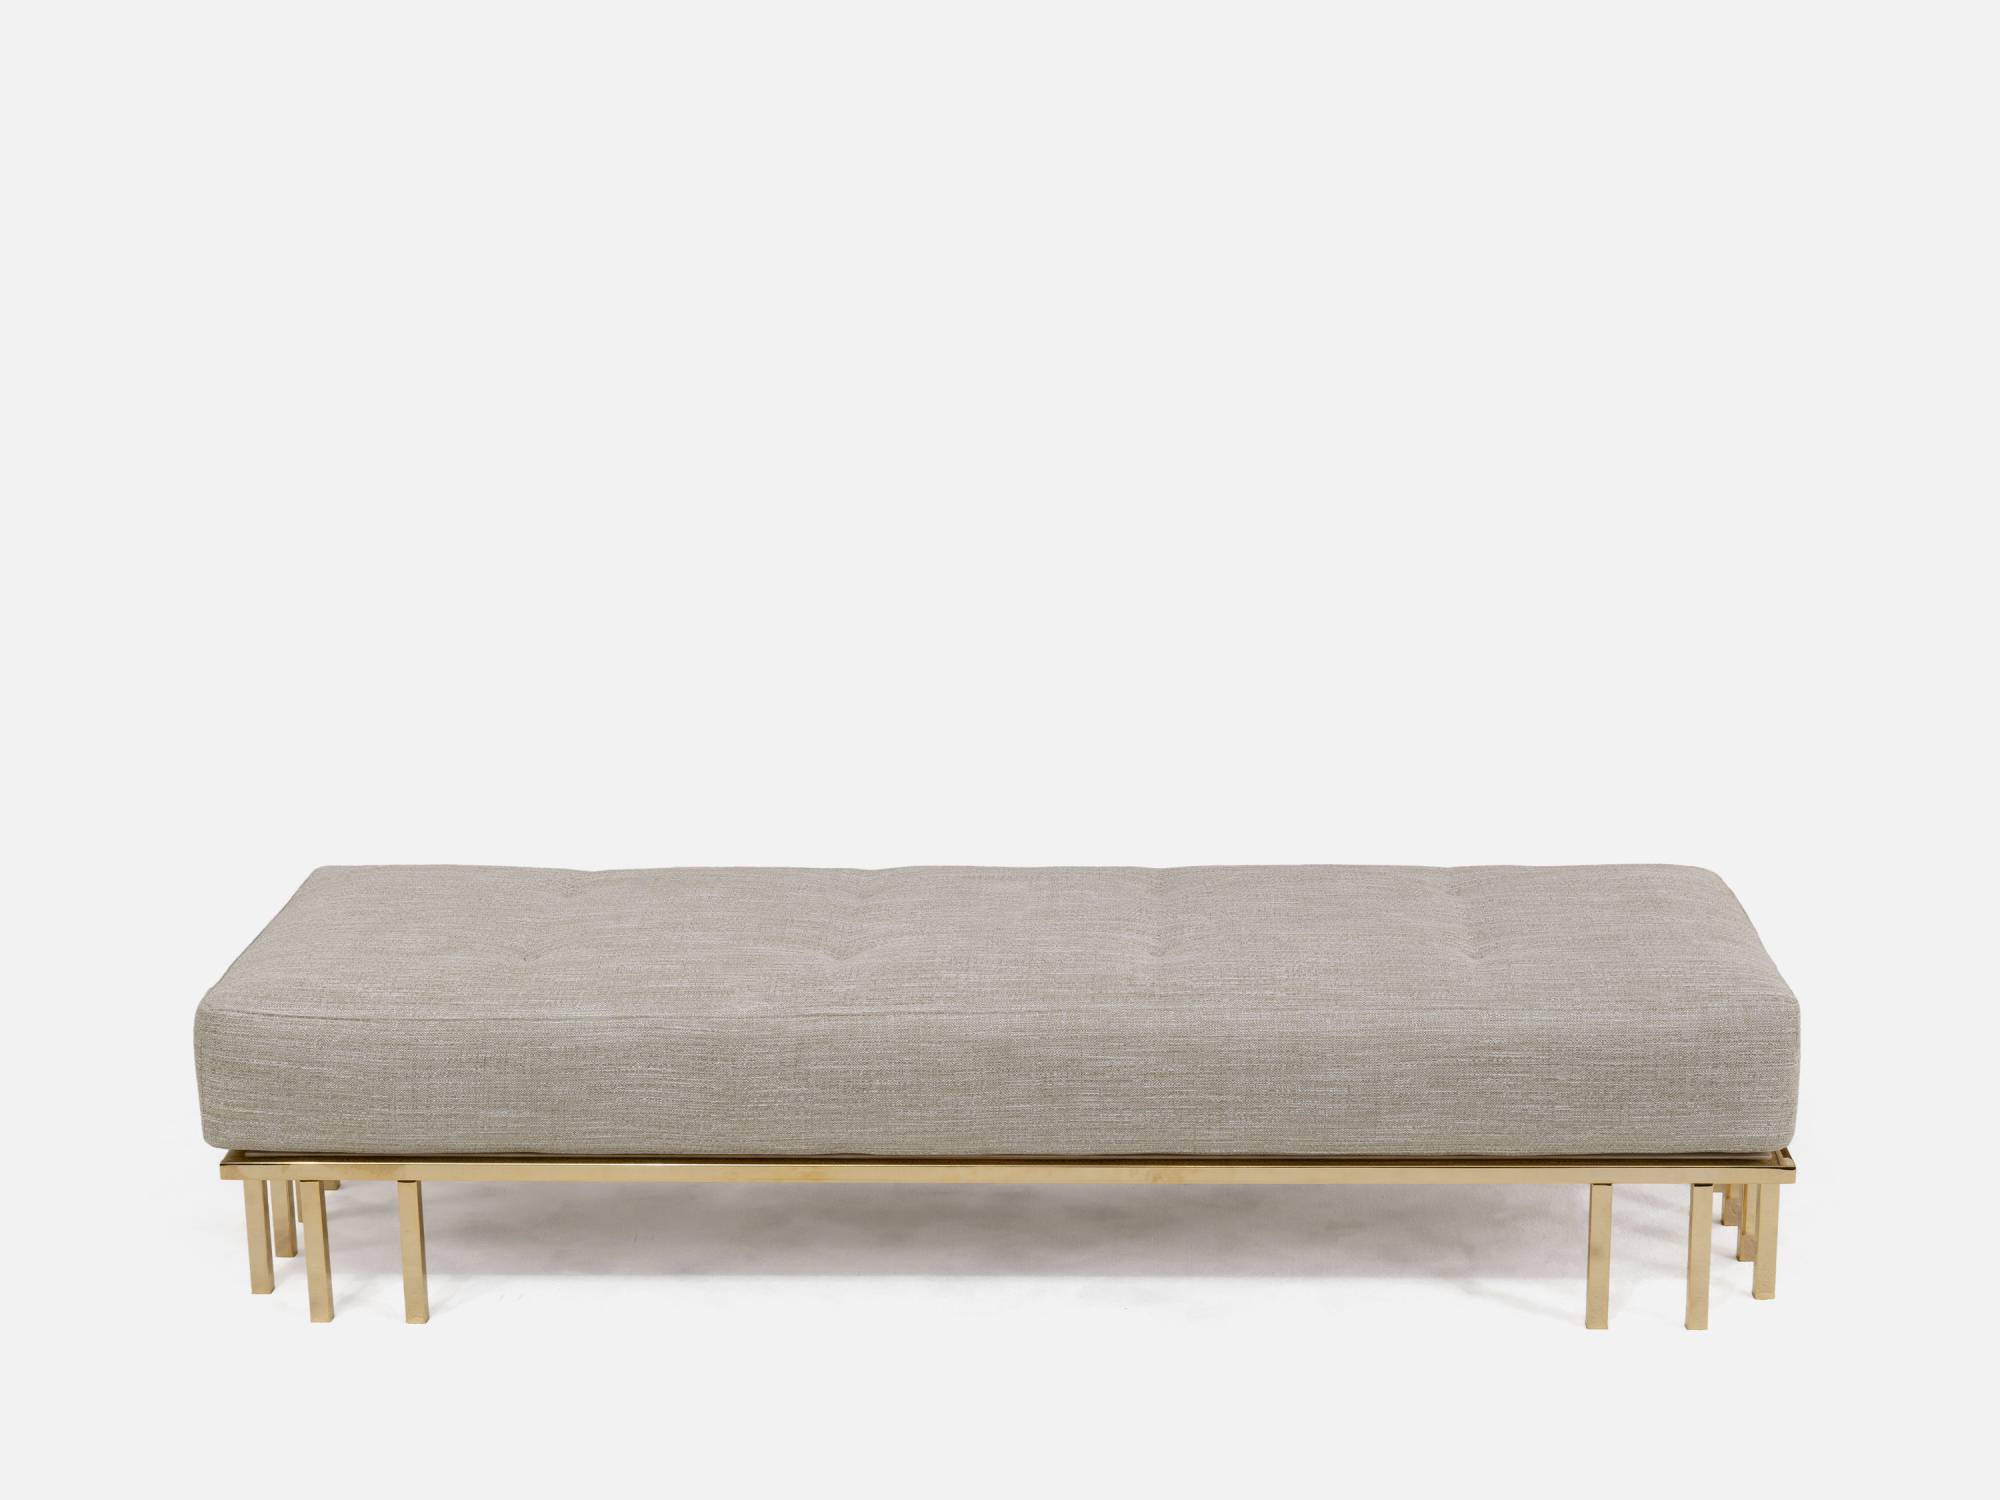 ART. 2290 – The elegance of luxury classic Benches and dormeuses made in Italy by C.G. Capelletti.